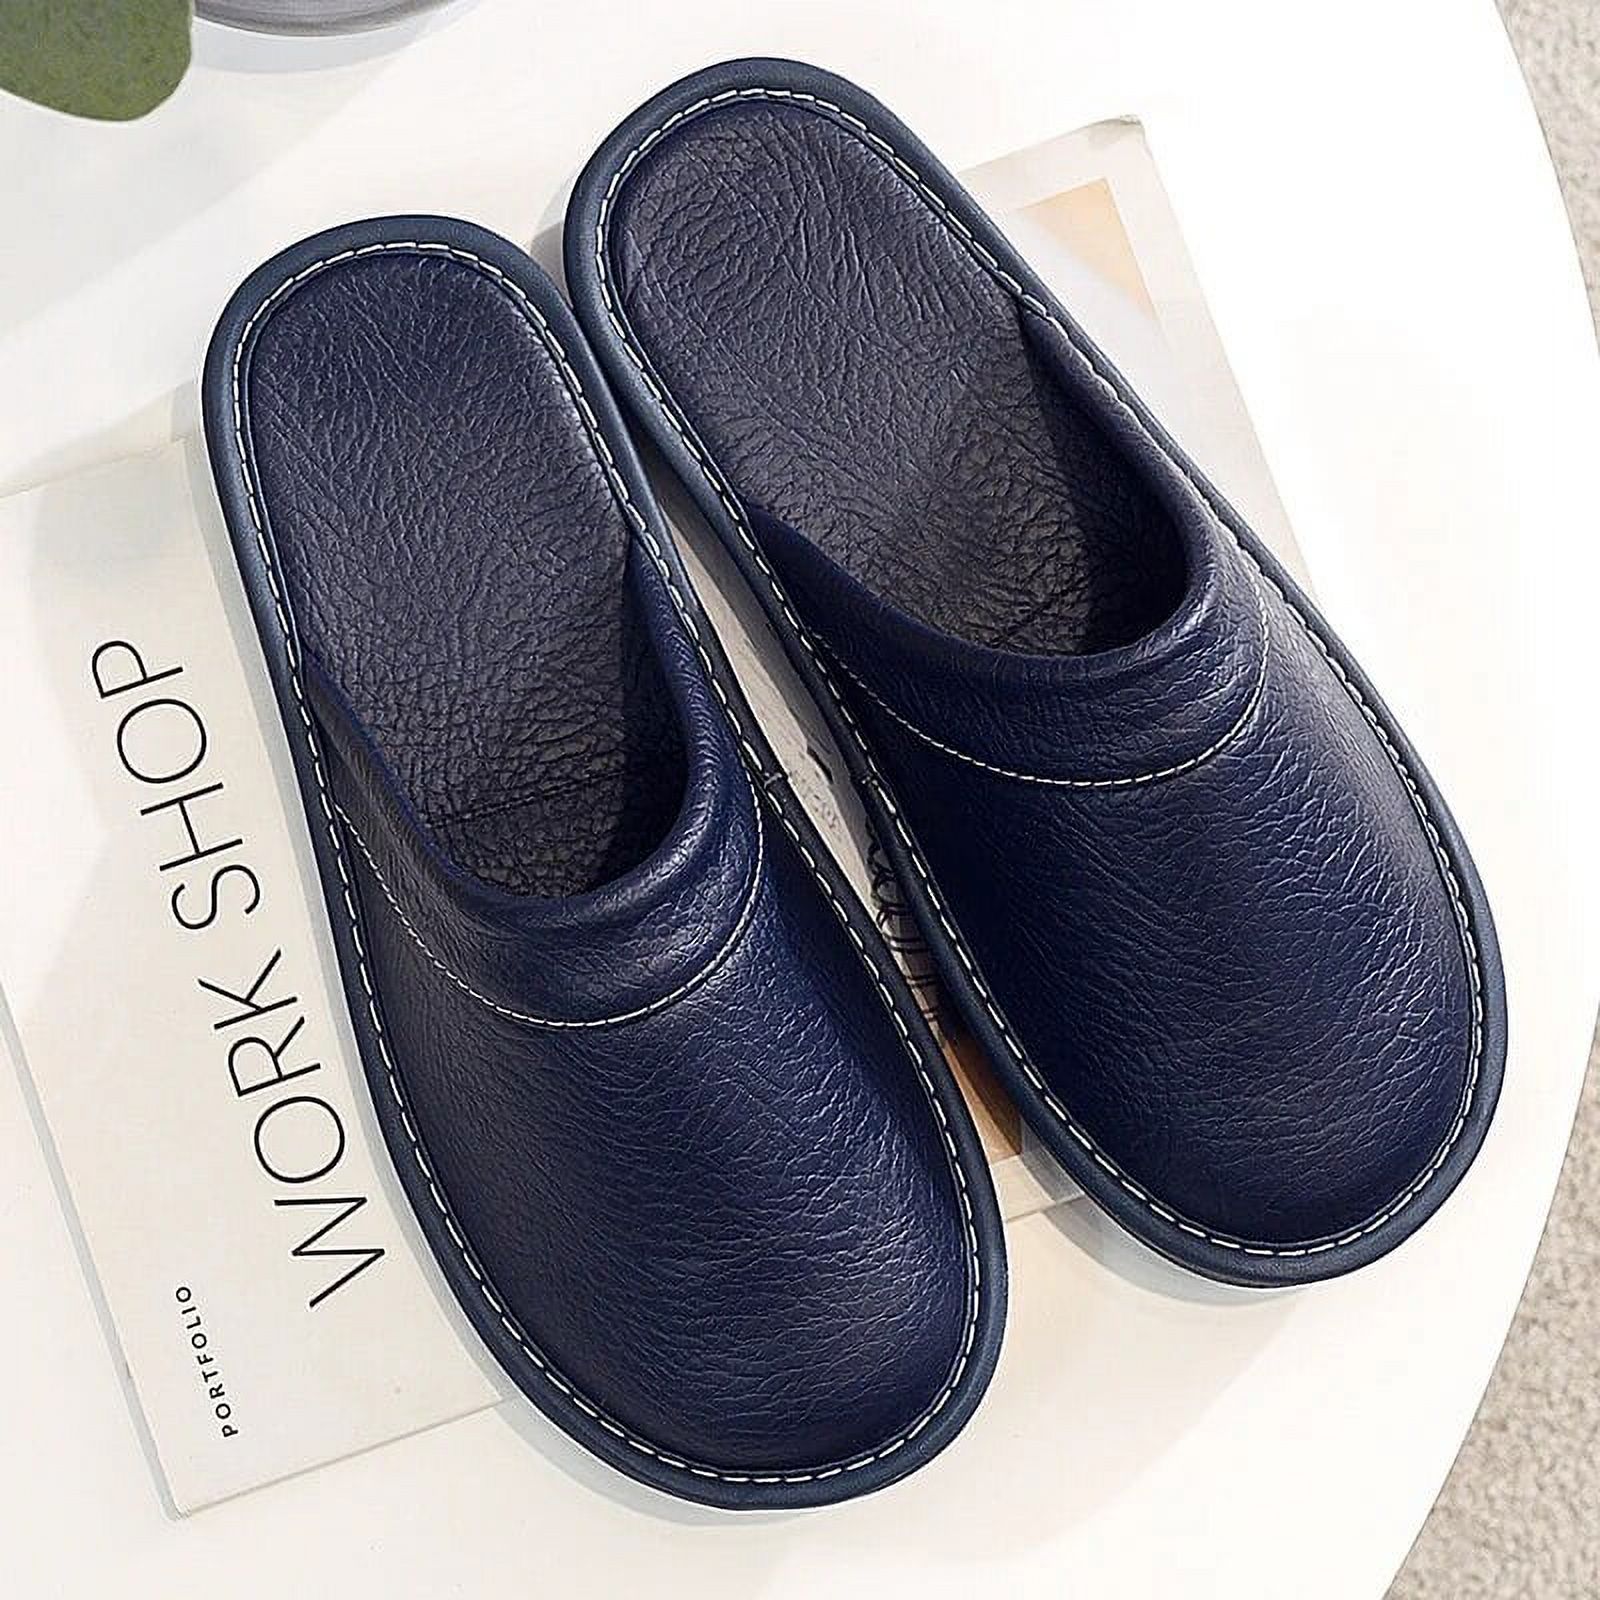 2021 New Arrival Runway Shoes Men Leather Home Slippers Unisex Flat ...